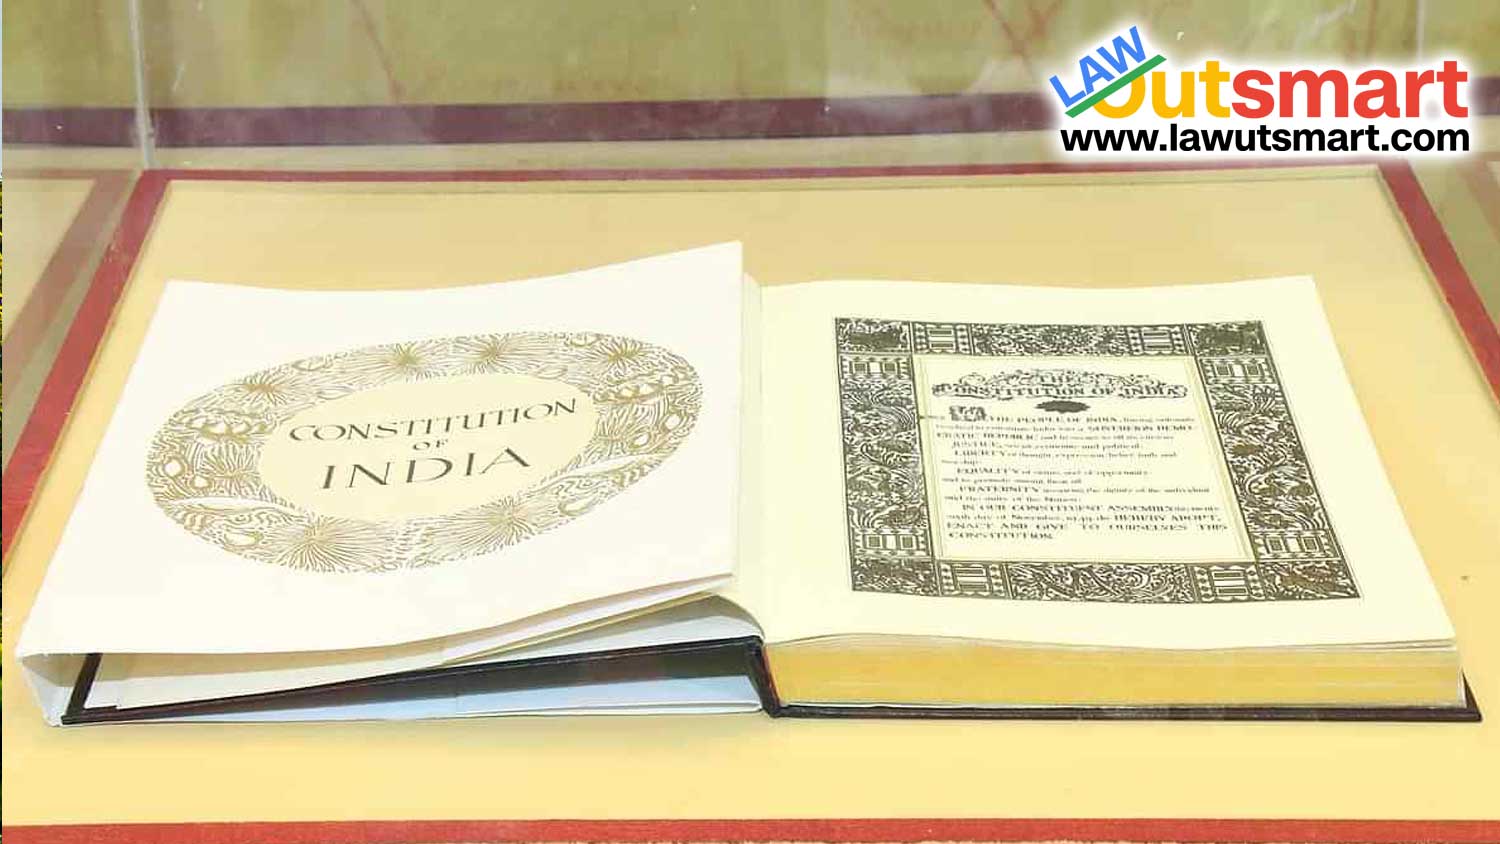 original copy of the constitution of India displayed in the Parliament library.